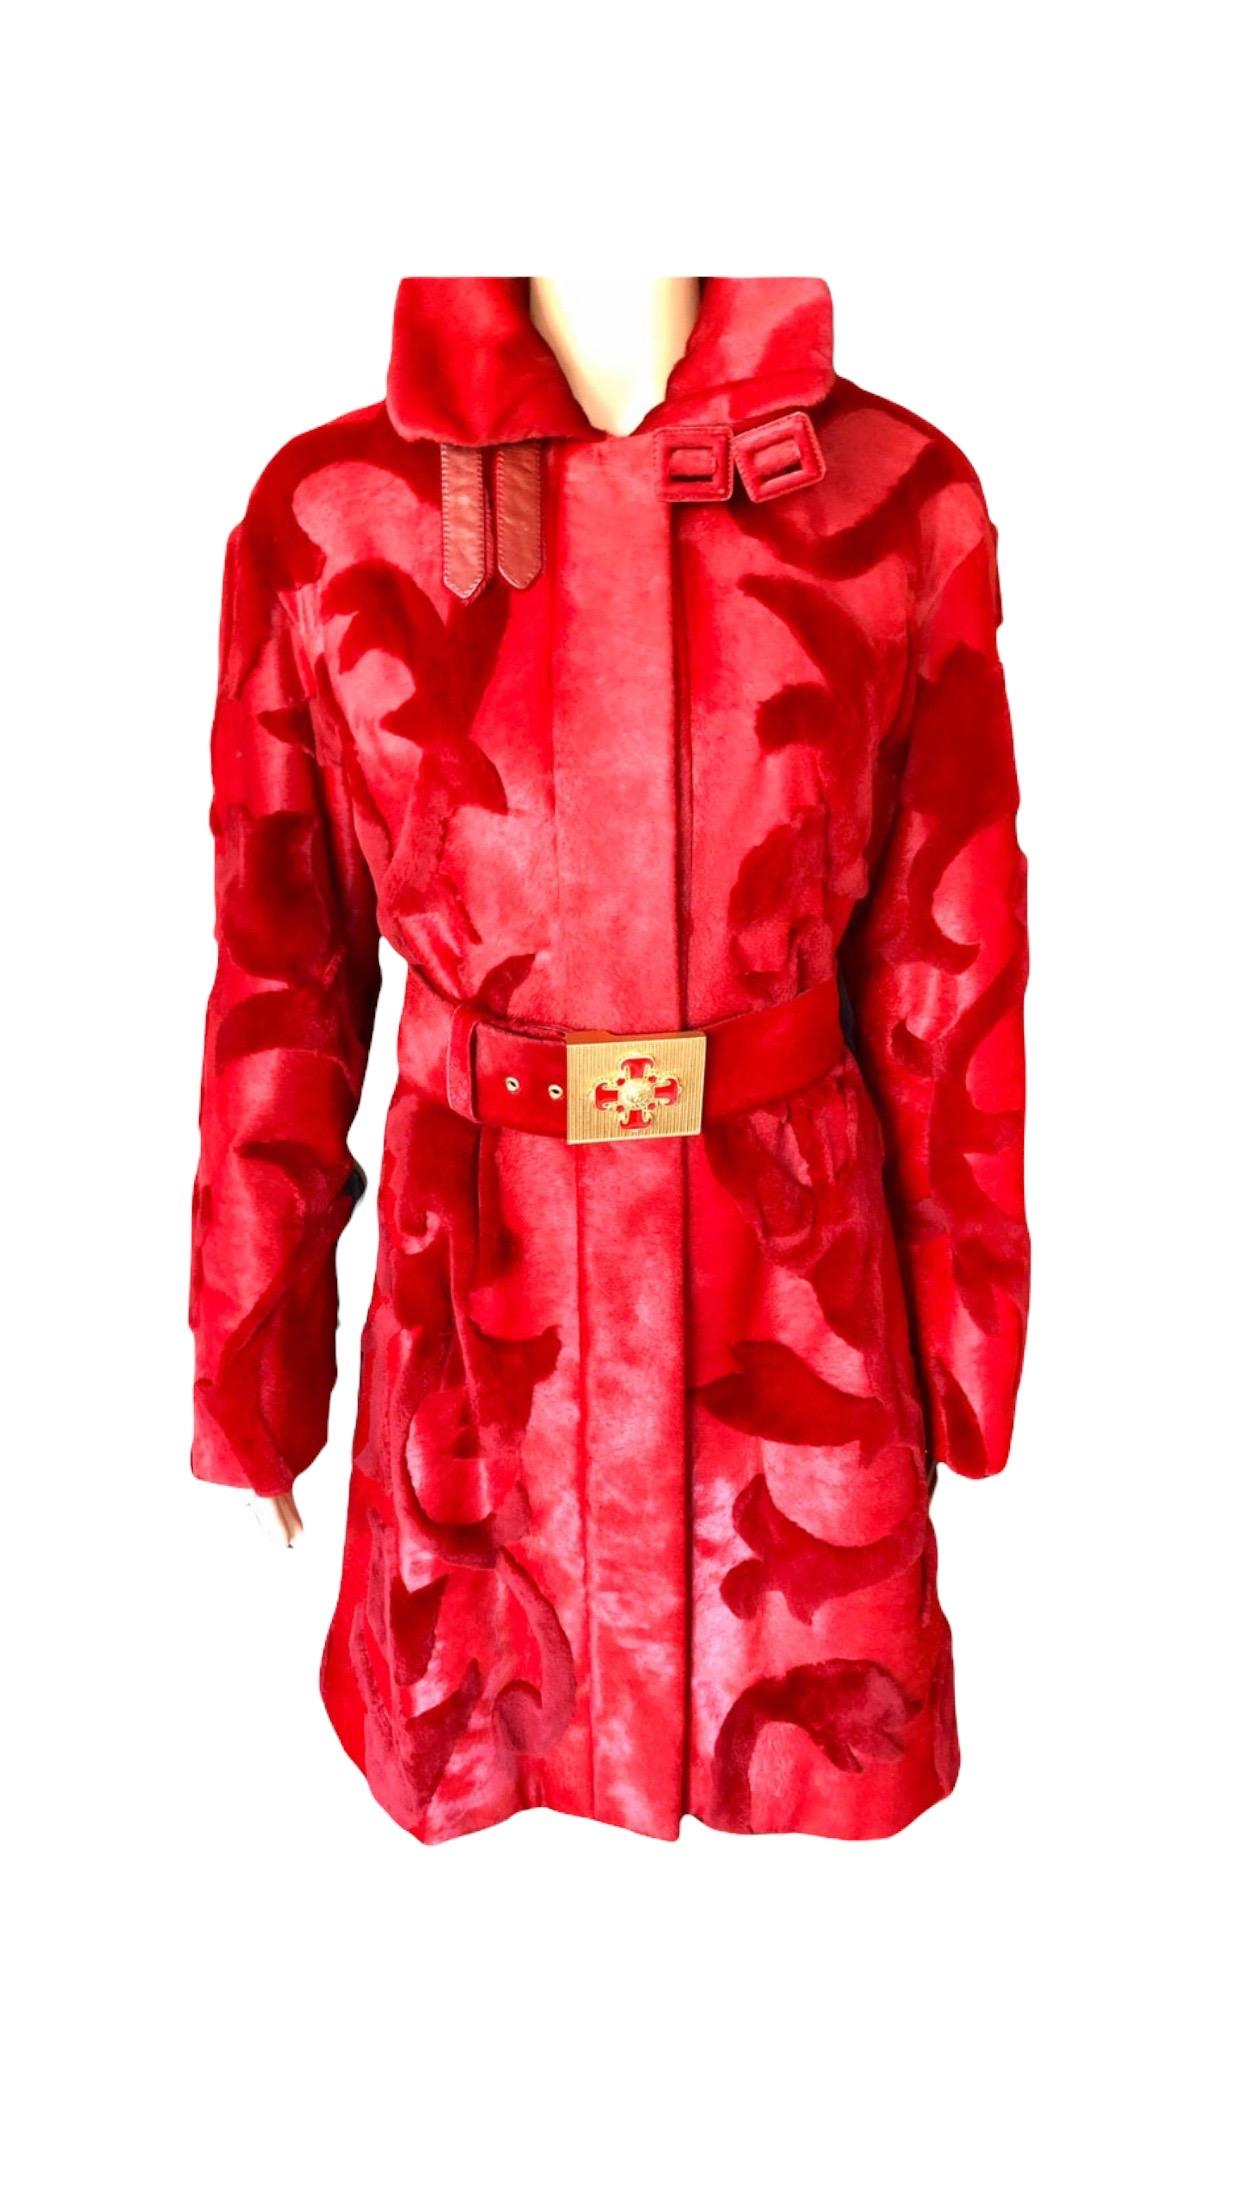 Versace F/W 2011 Runway Mink Fur and Leather Belted Knee-Length Red Jacket Coat For Sale 6